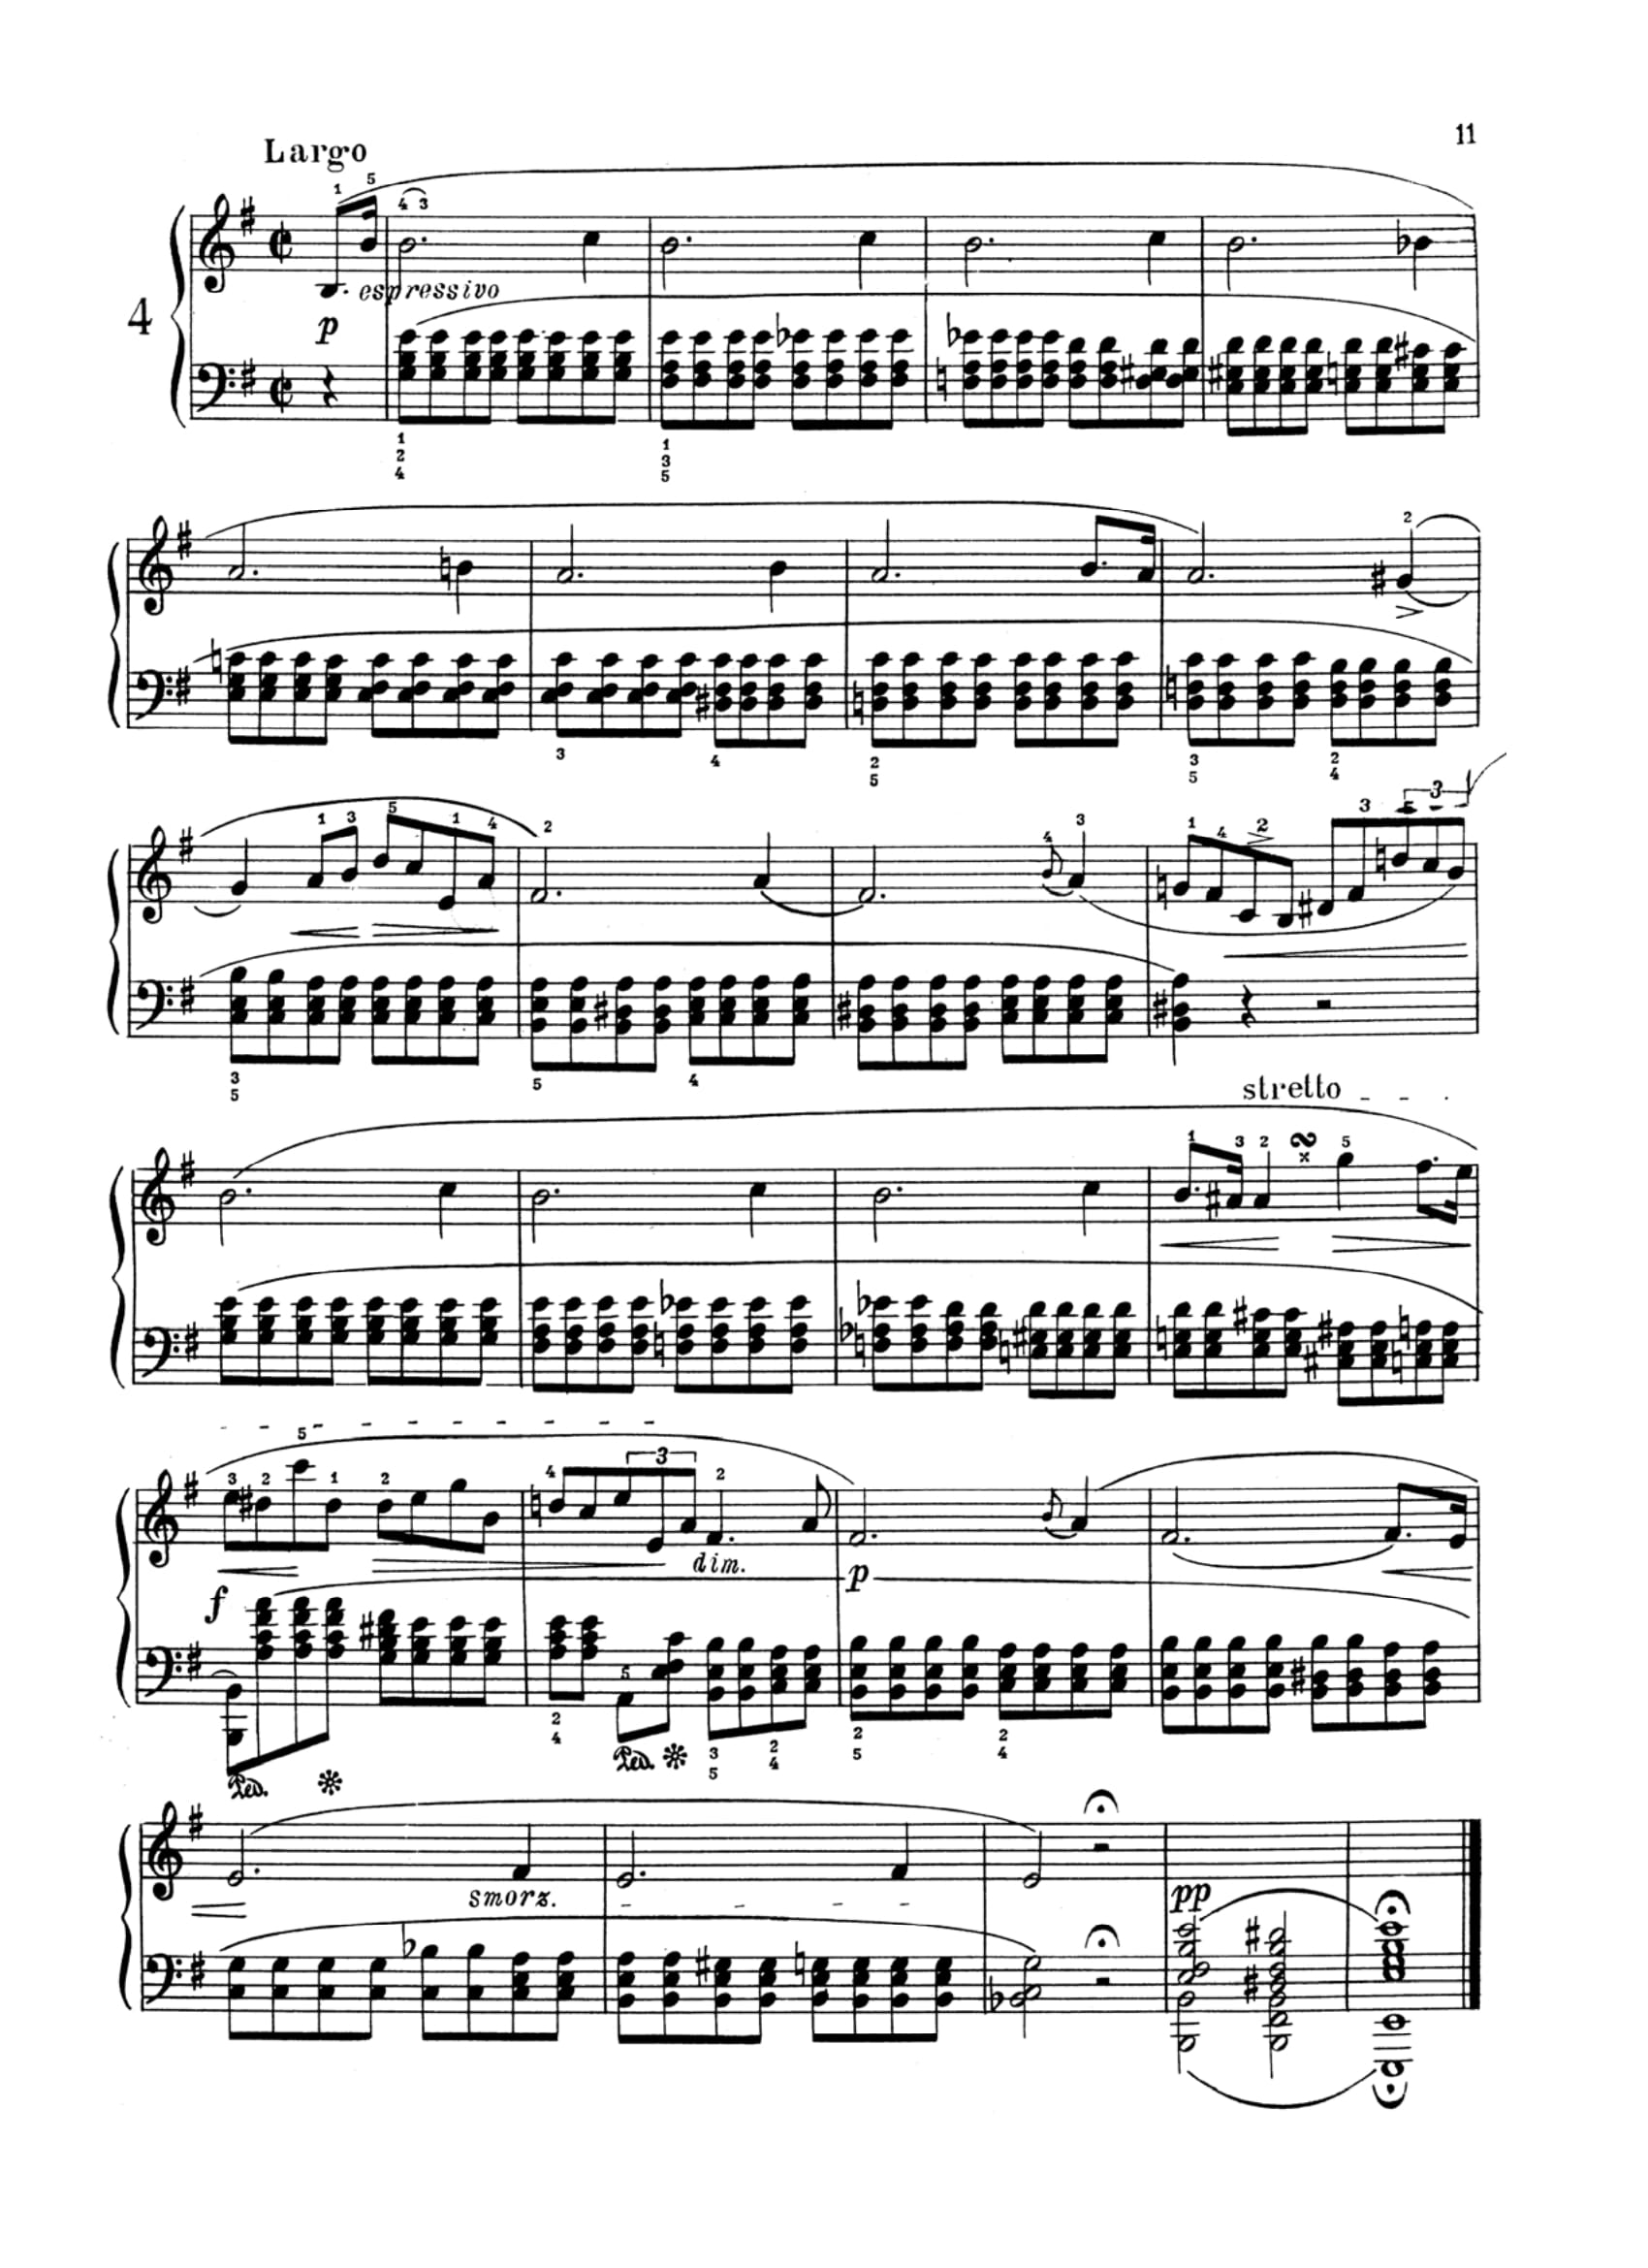 Sheet music for analysis of Chopin's Prelude in E Minor, Op. 28 No. 4